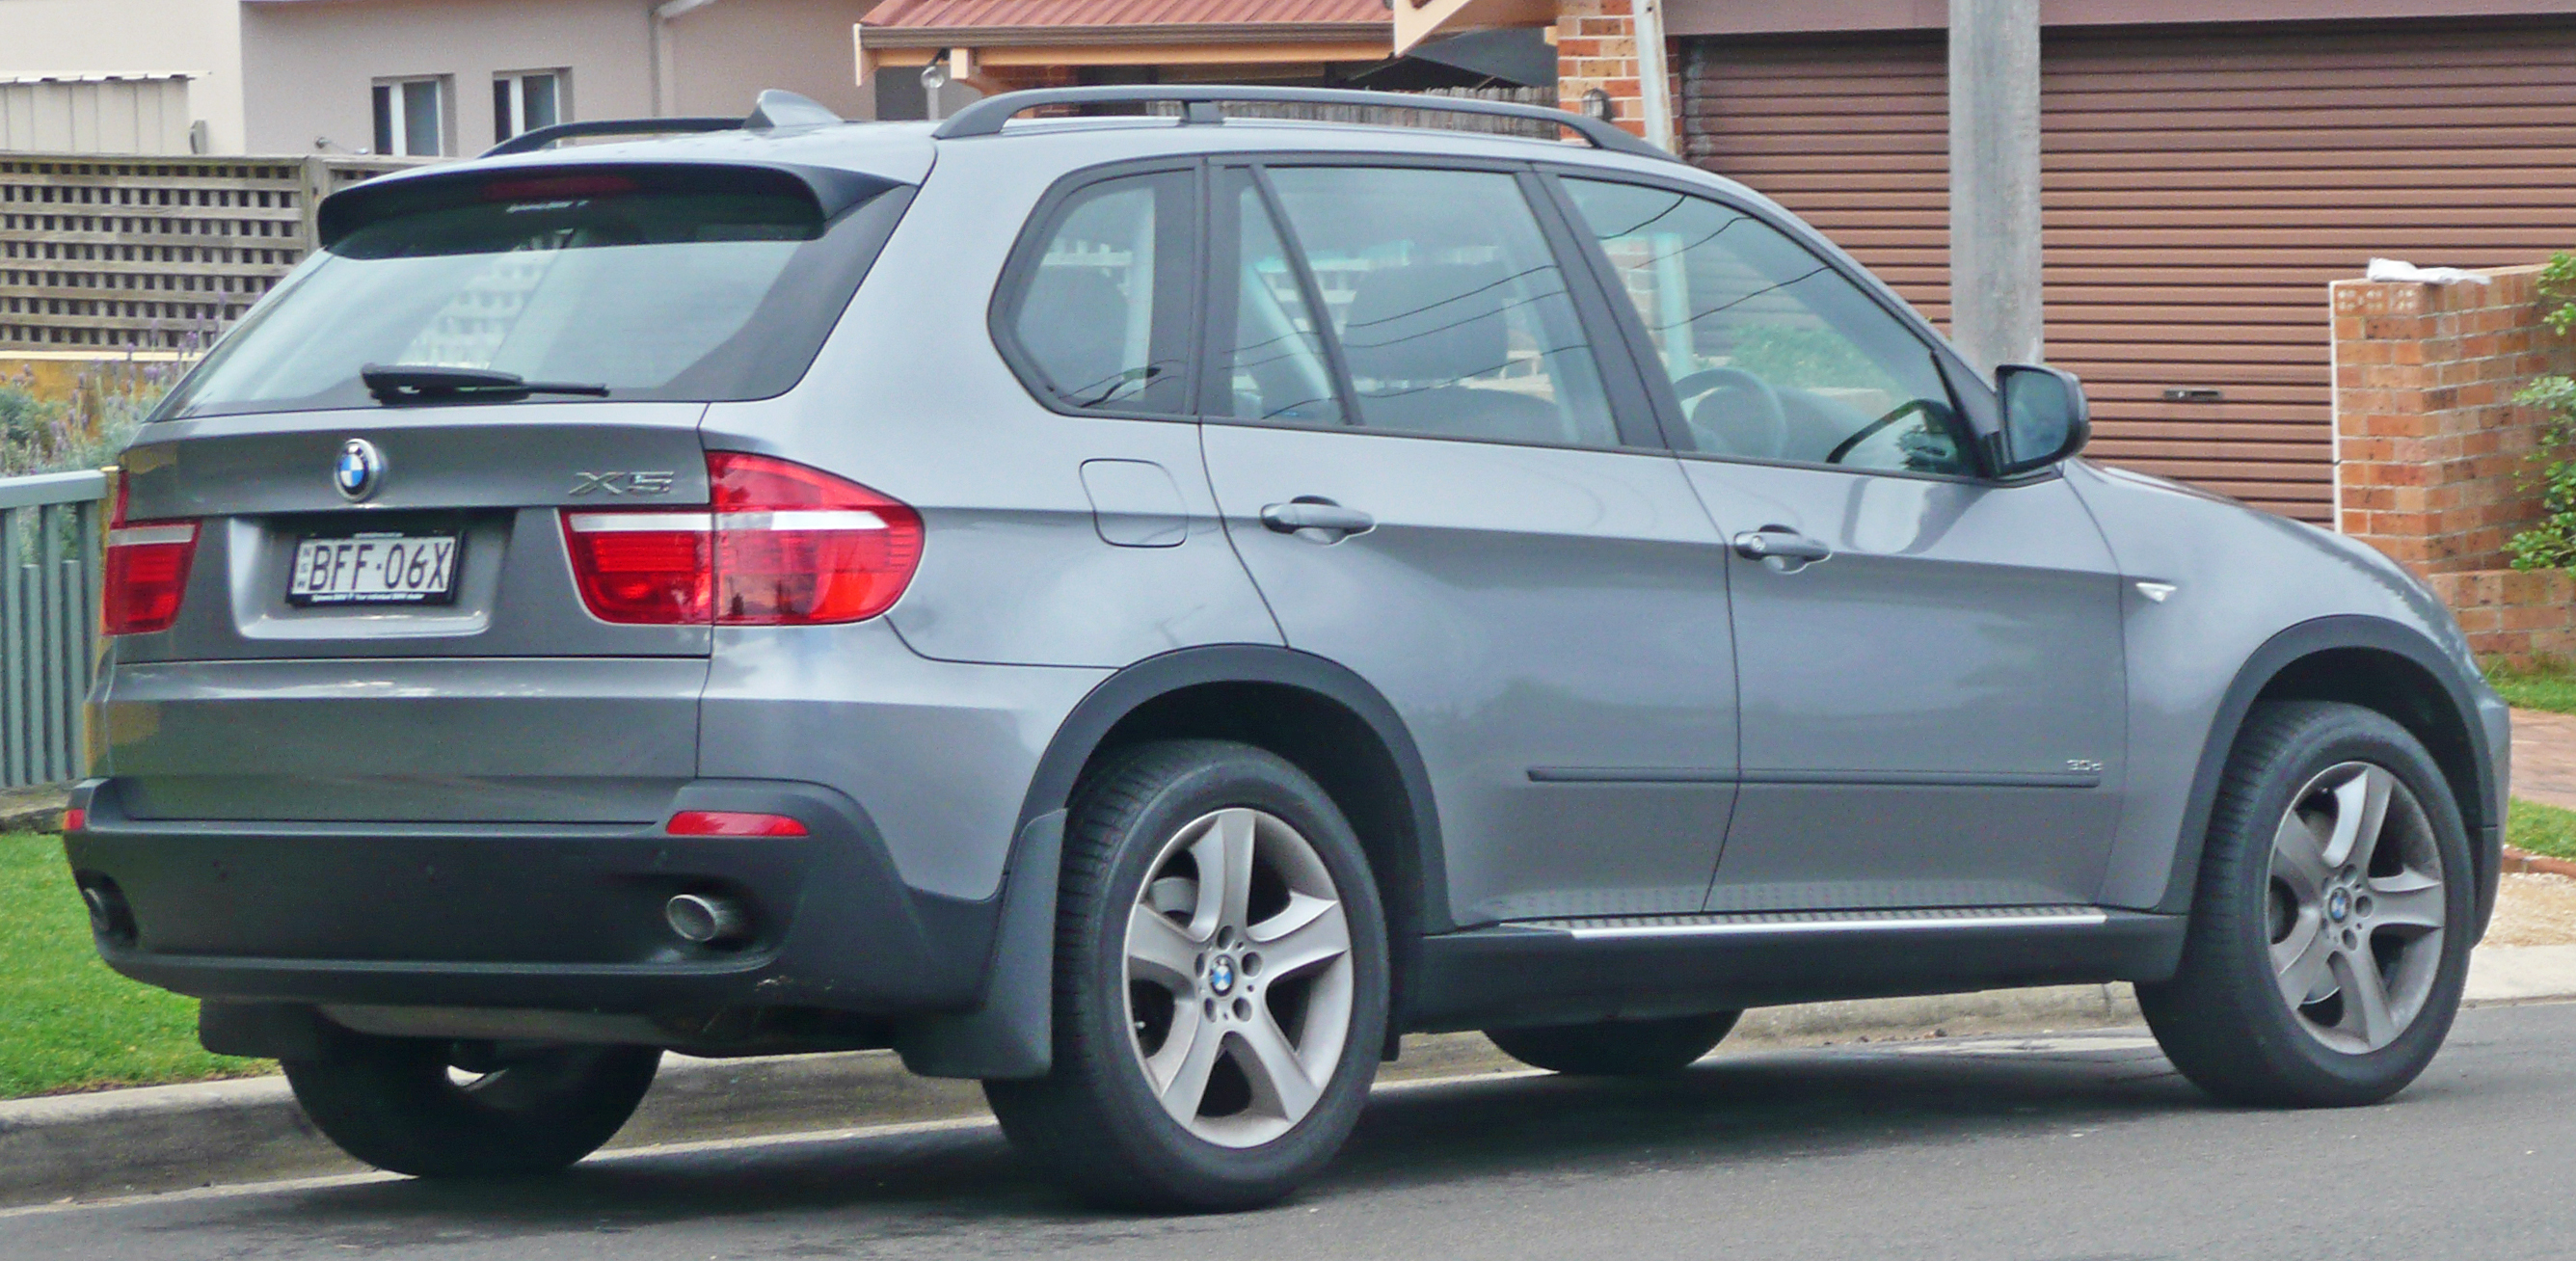 BMW X5 Series Exterior Side View